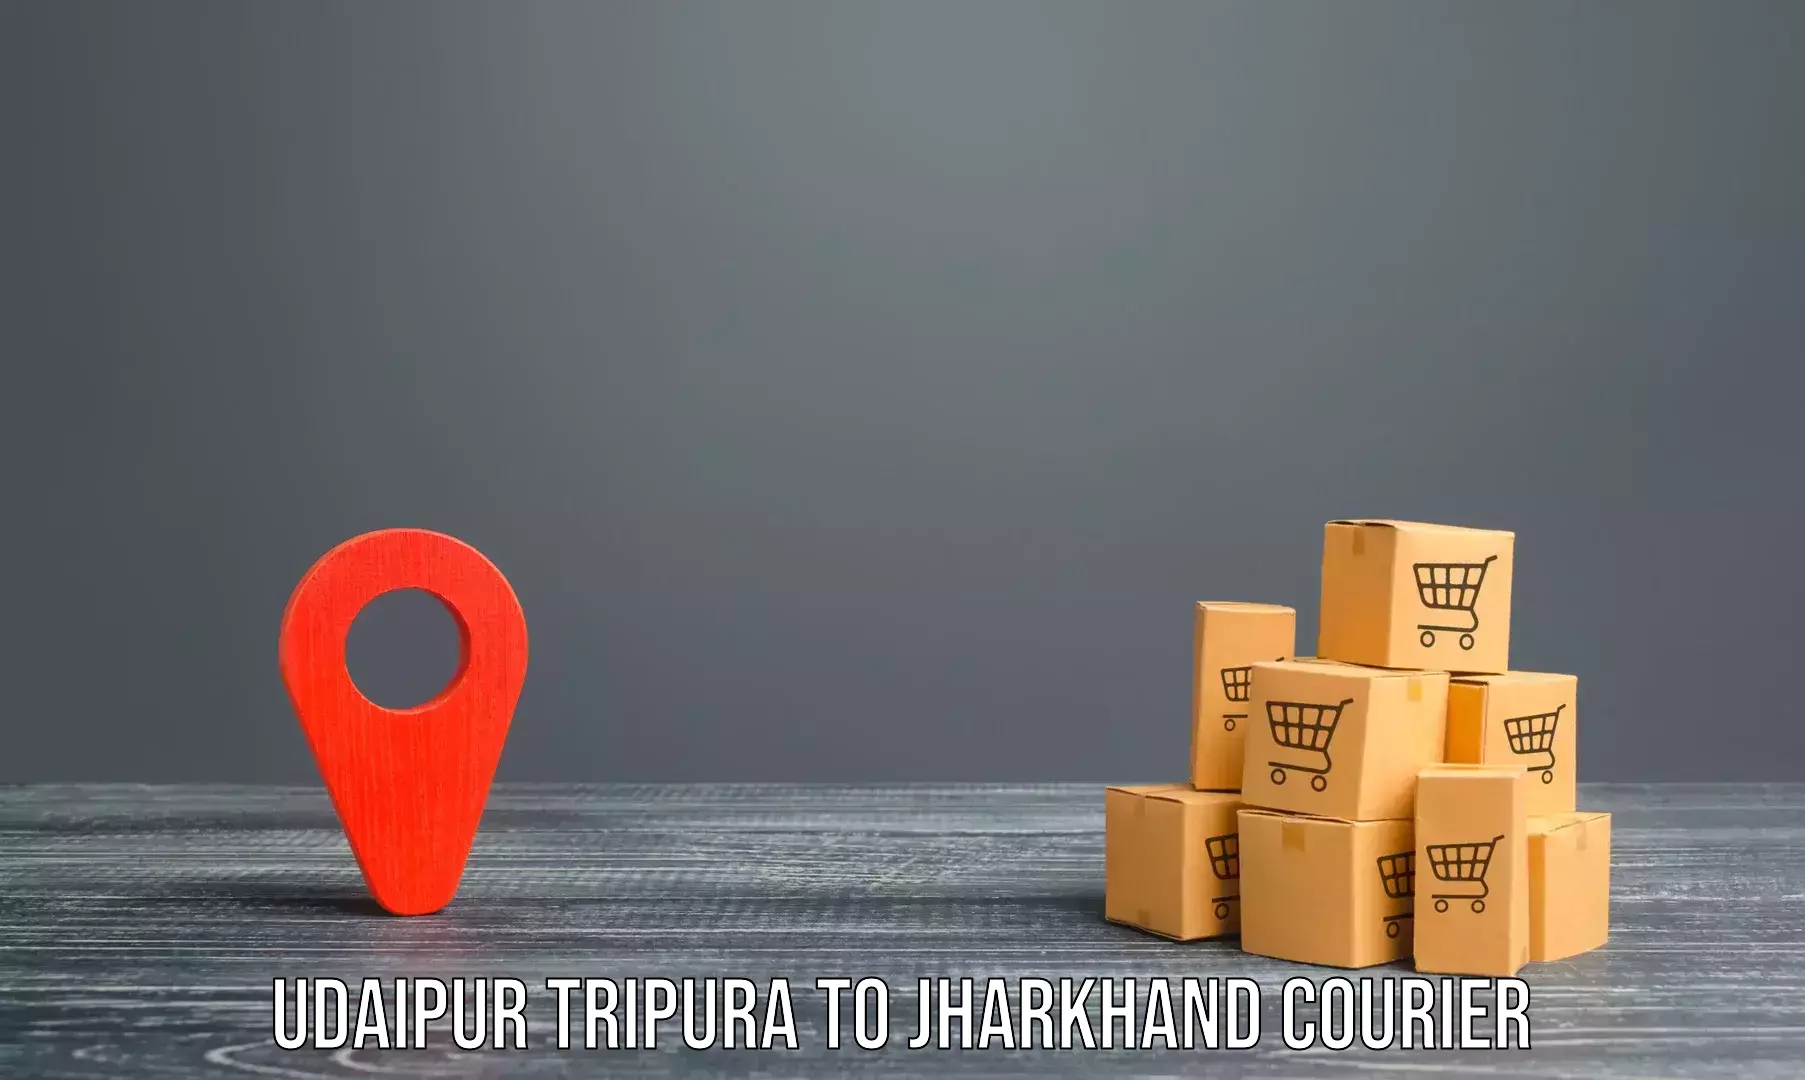 Residential moving experts Udaipur Tripura to Jamshedpur